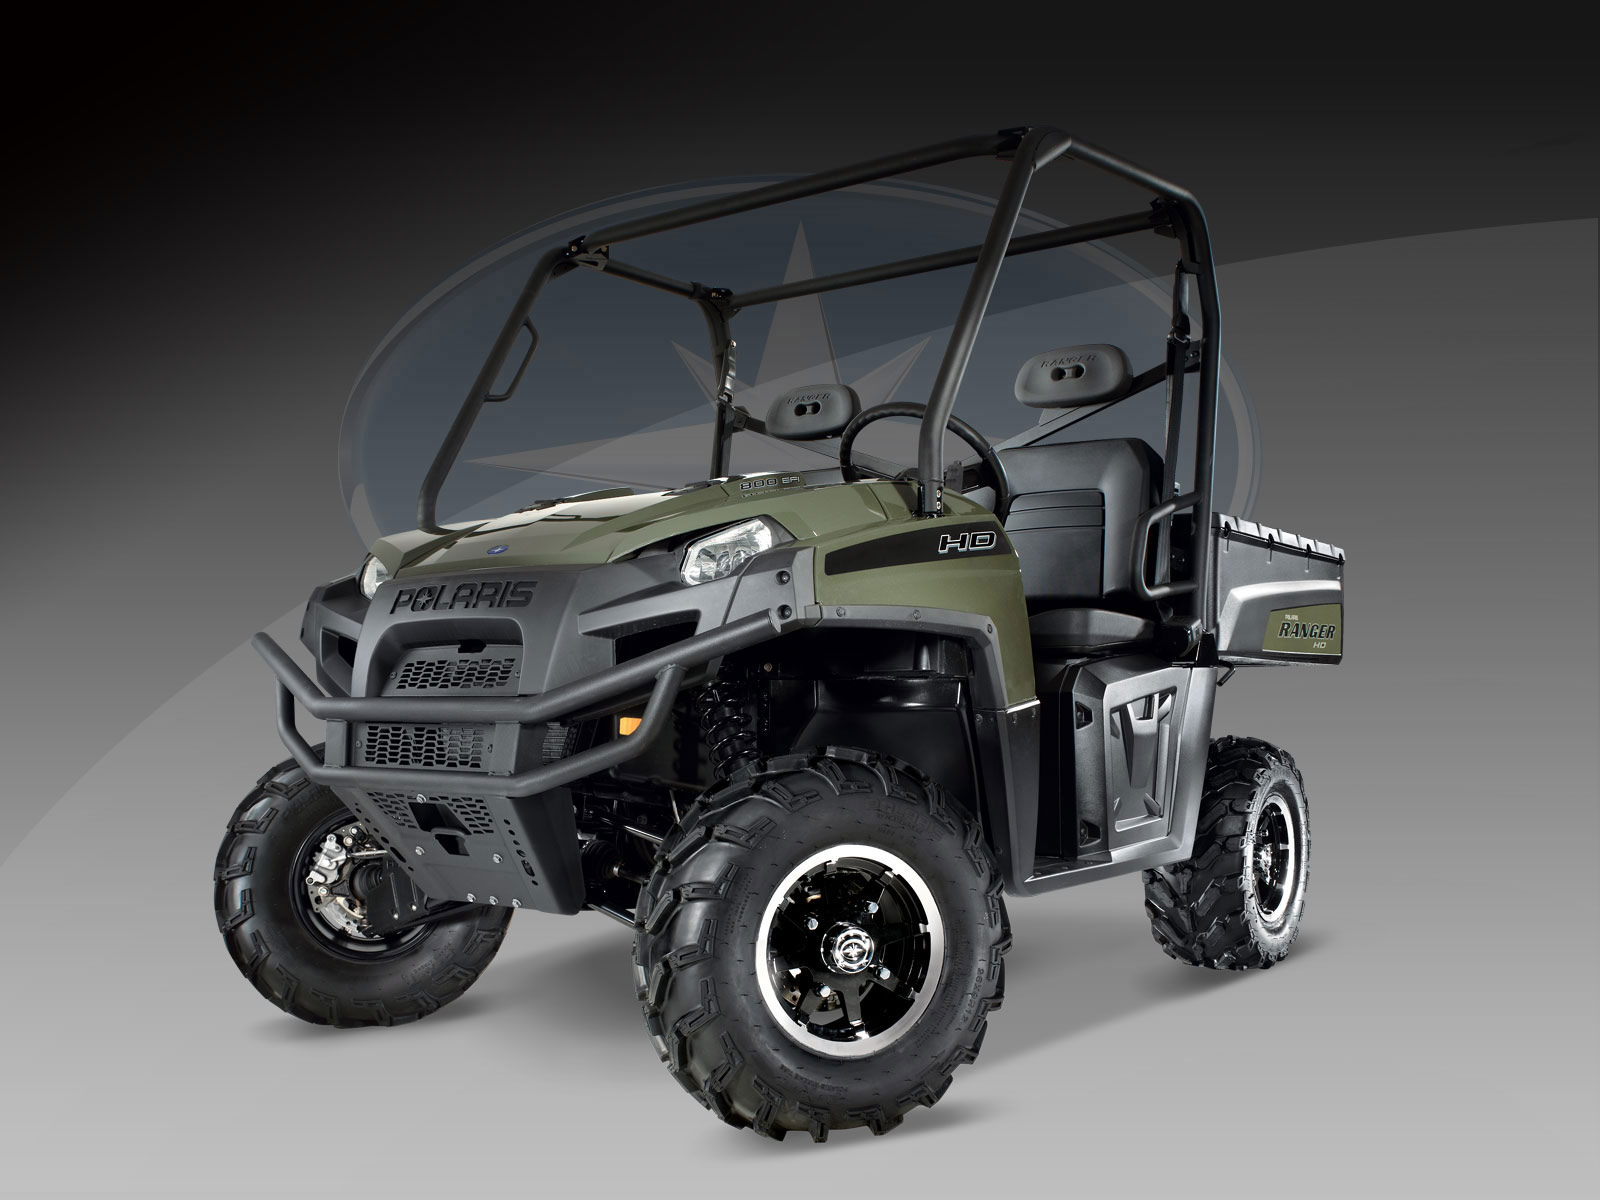 ATV picture, wallpaper, specs, insurance, accident lawyers: 2010 POLARIS Ranger 800HD ATV Accident Lawyers Information